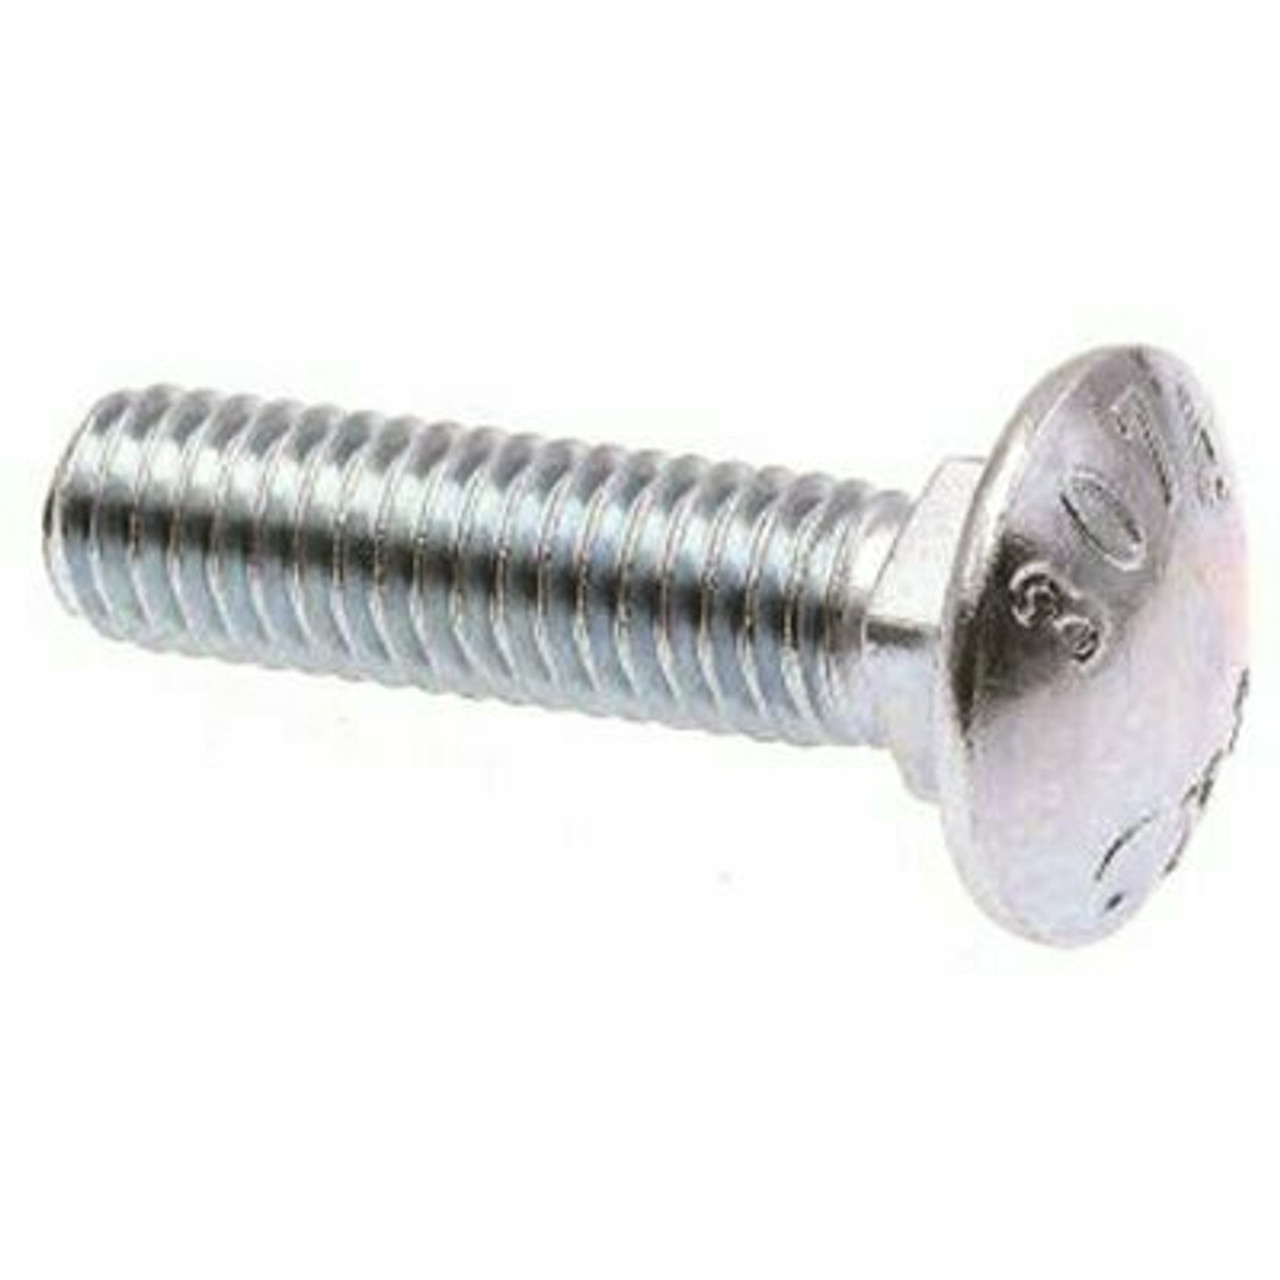 3/8 In.-16 X 1 In. Zinc Plated Carriage Bolts (100 Per Pack)